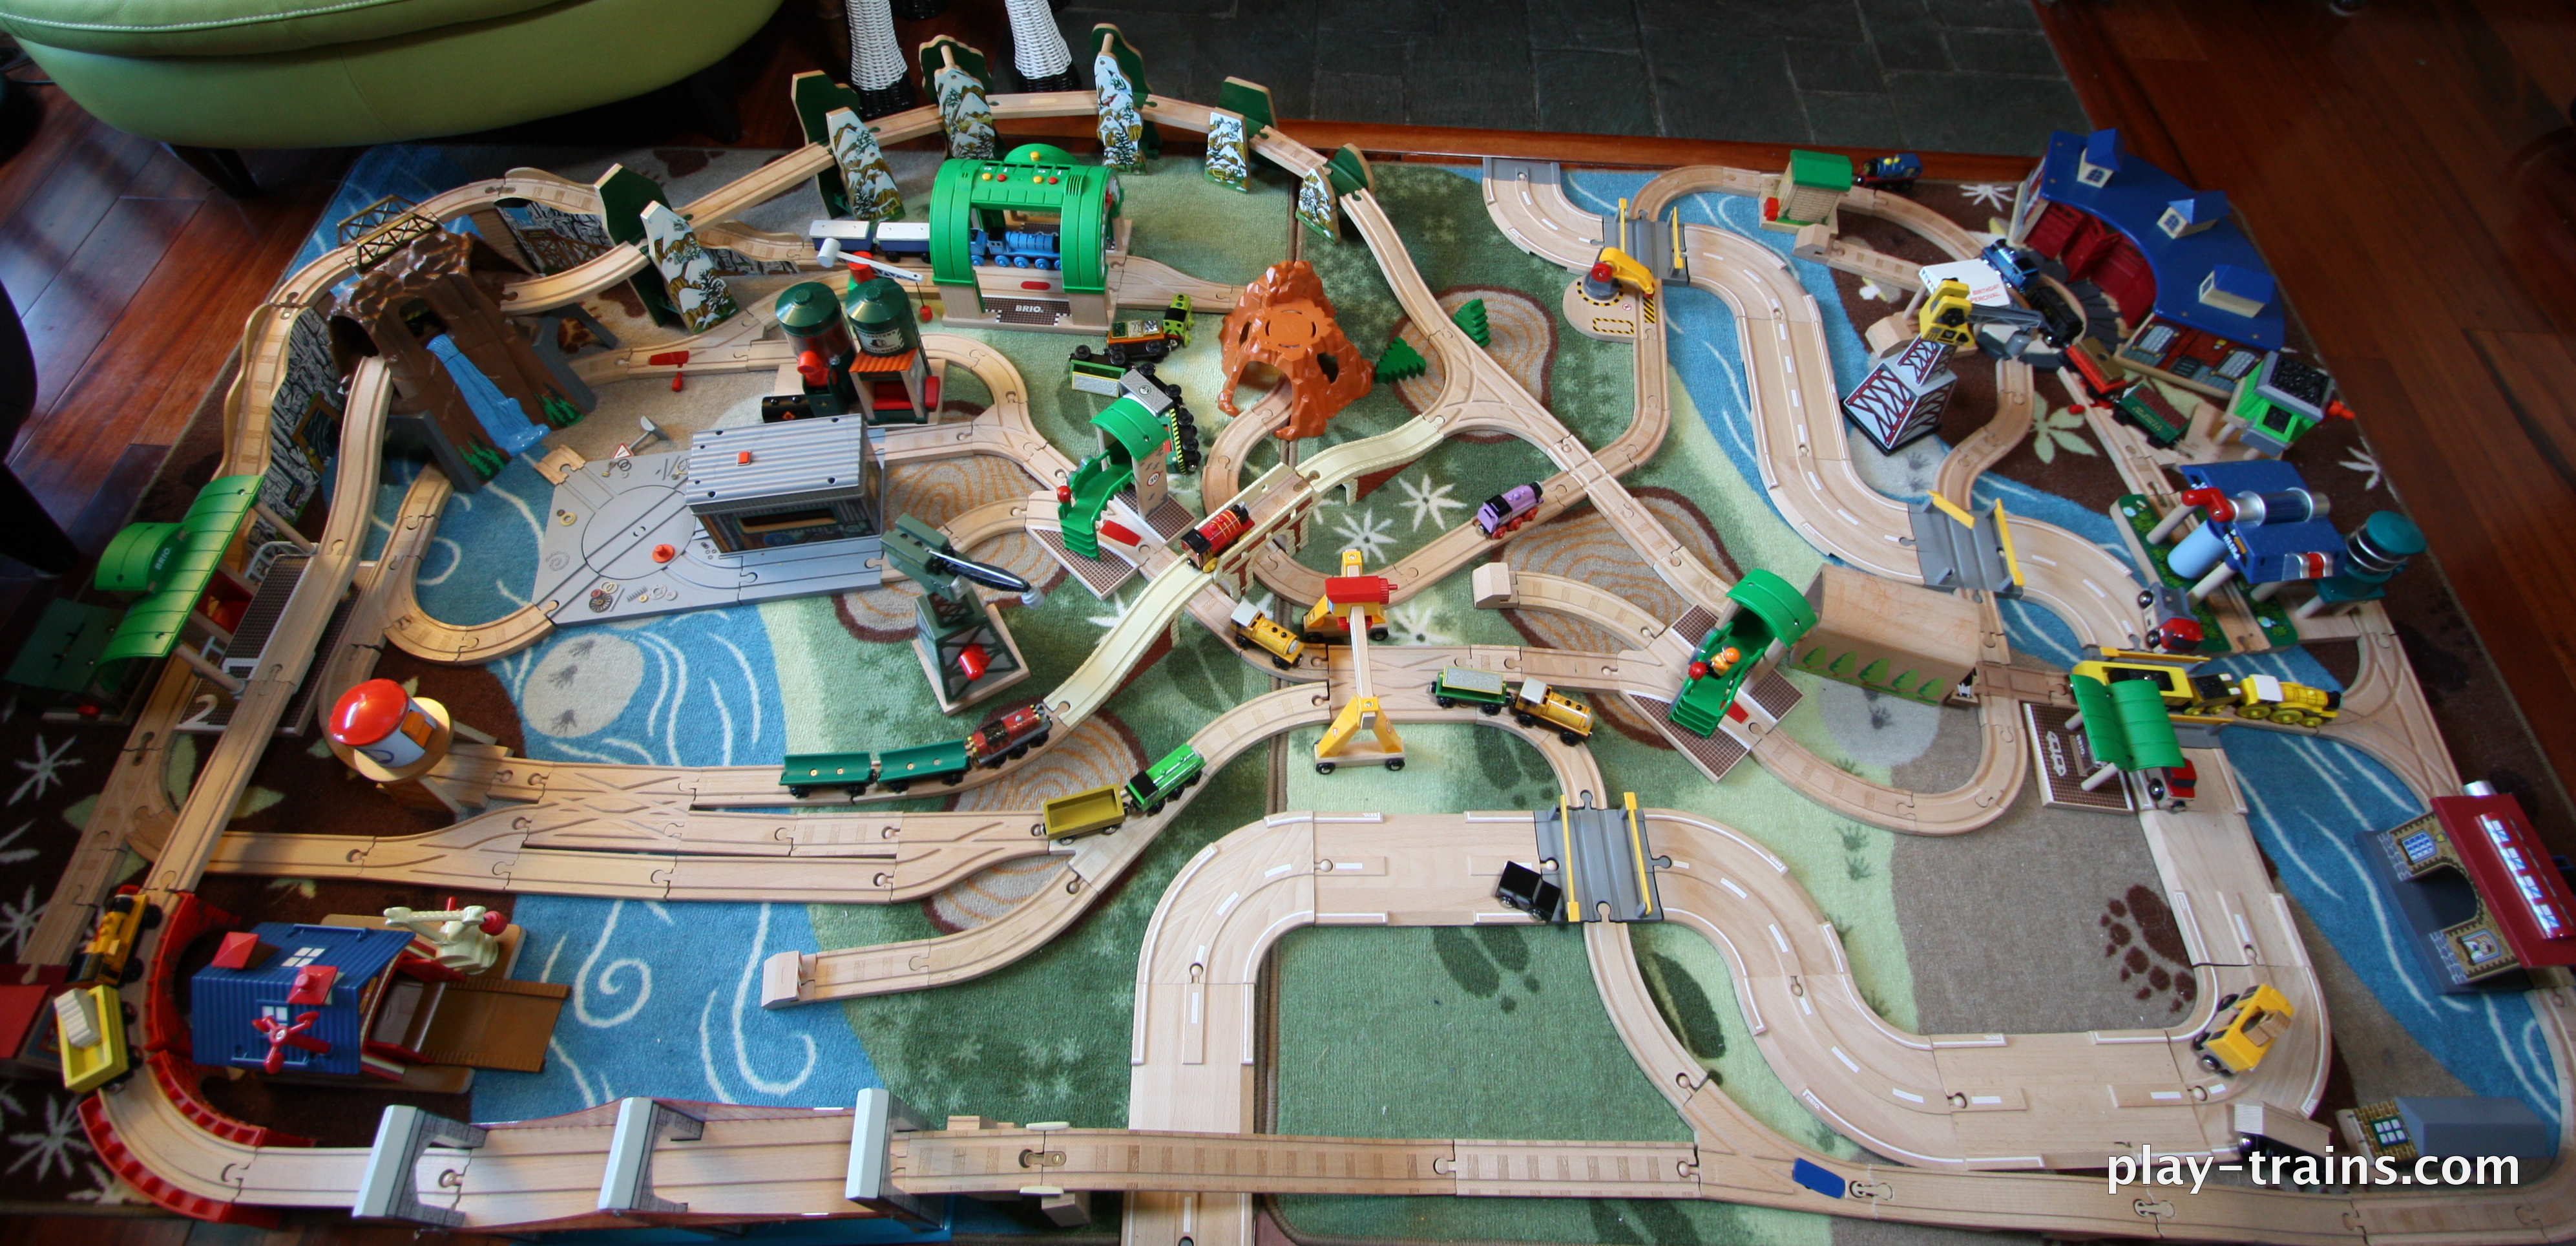 Our Latest Wooden Train Layout